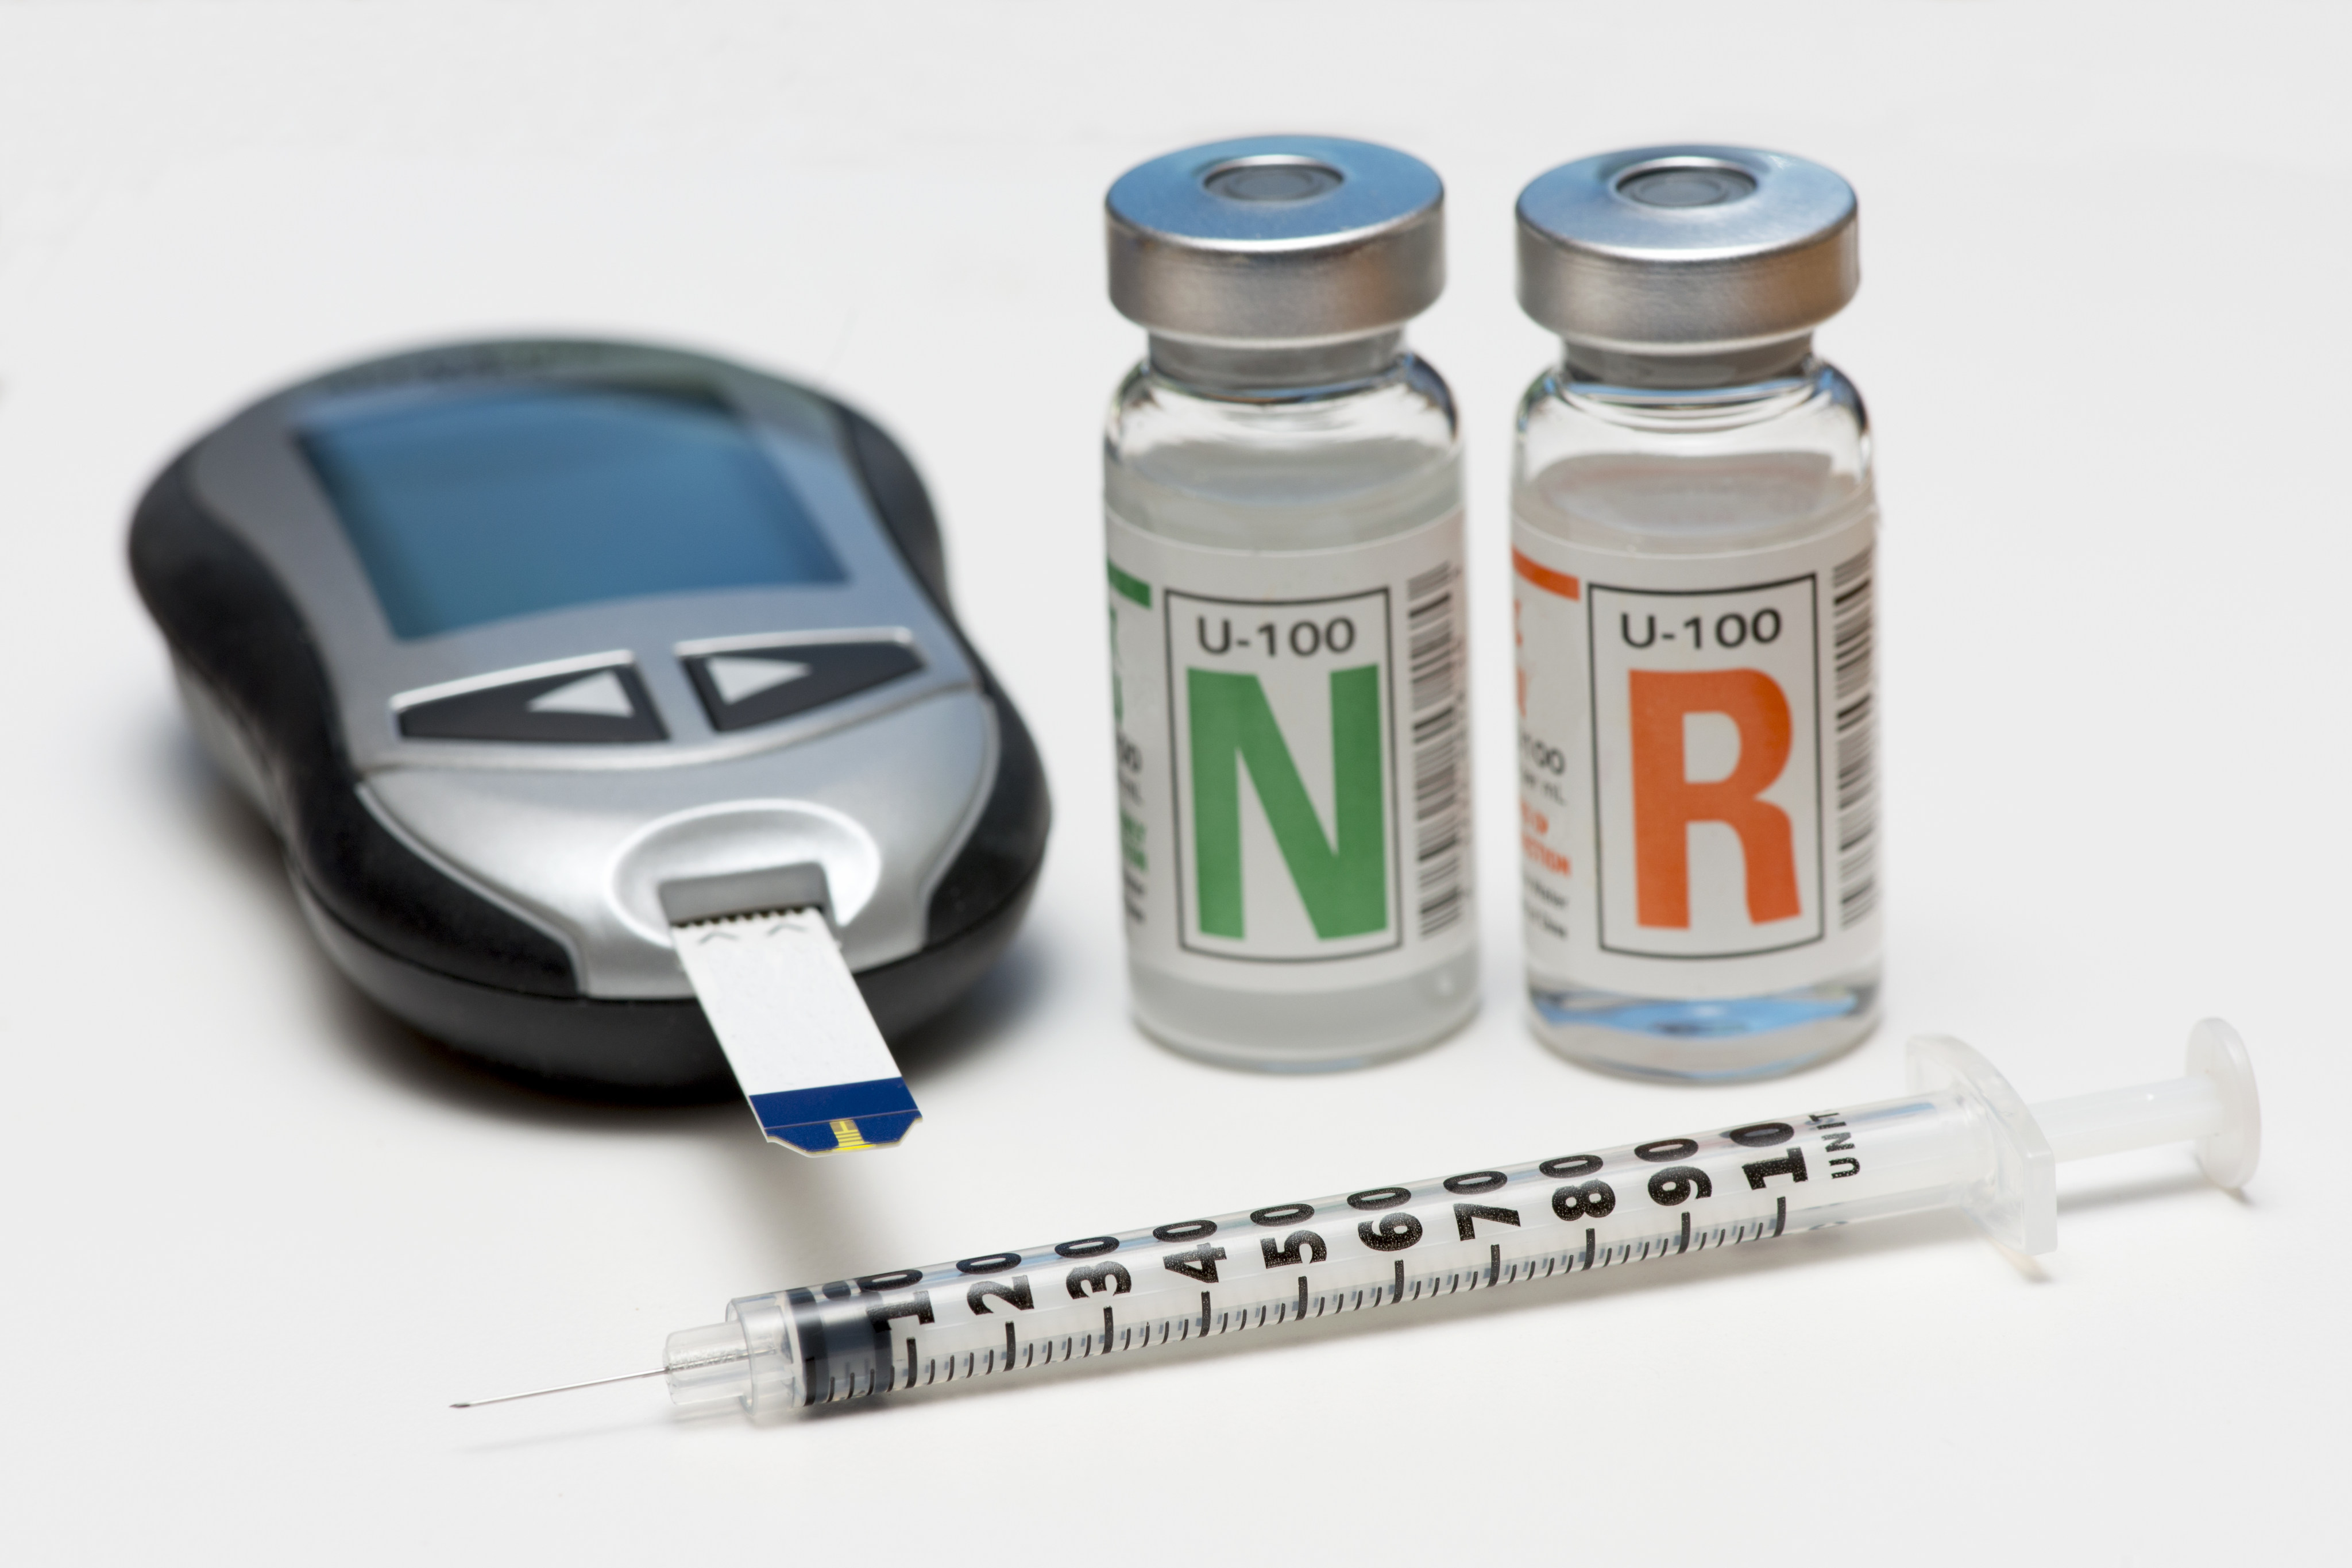 Regular and NPH insulin with glucometer and syringe.